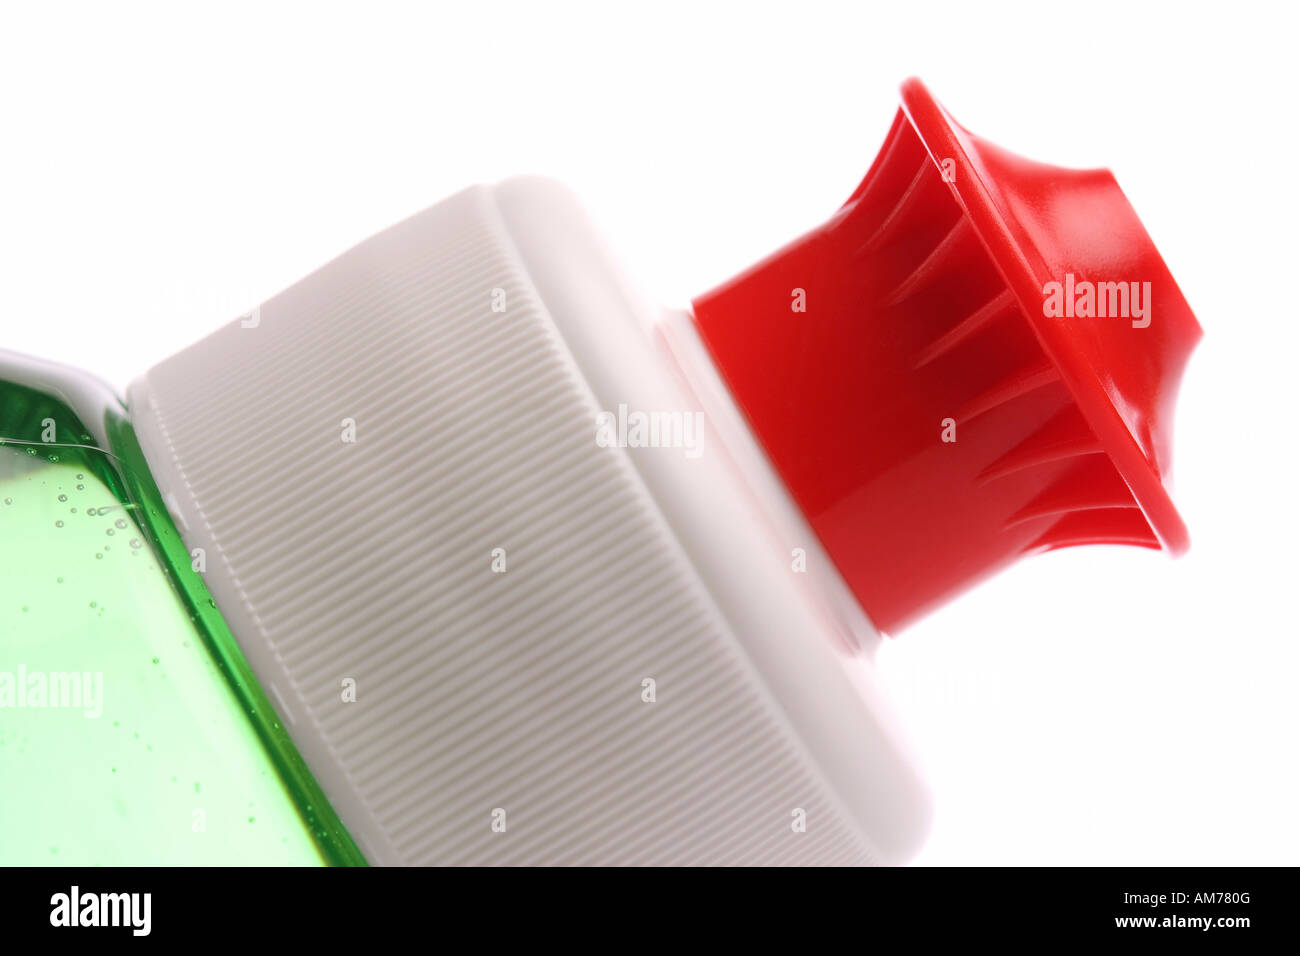 Red closing cap, cleaner bottle Stock Photo